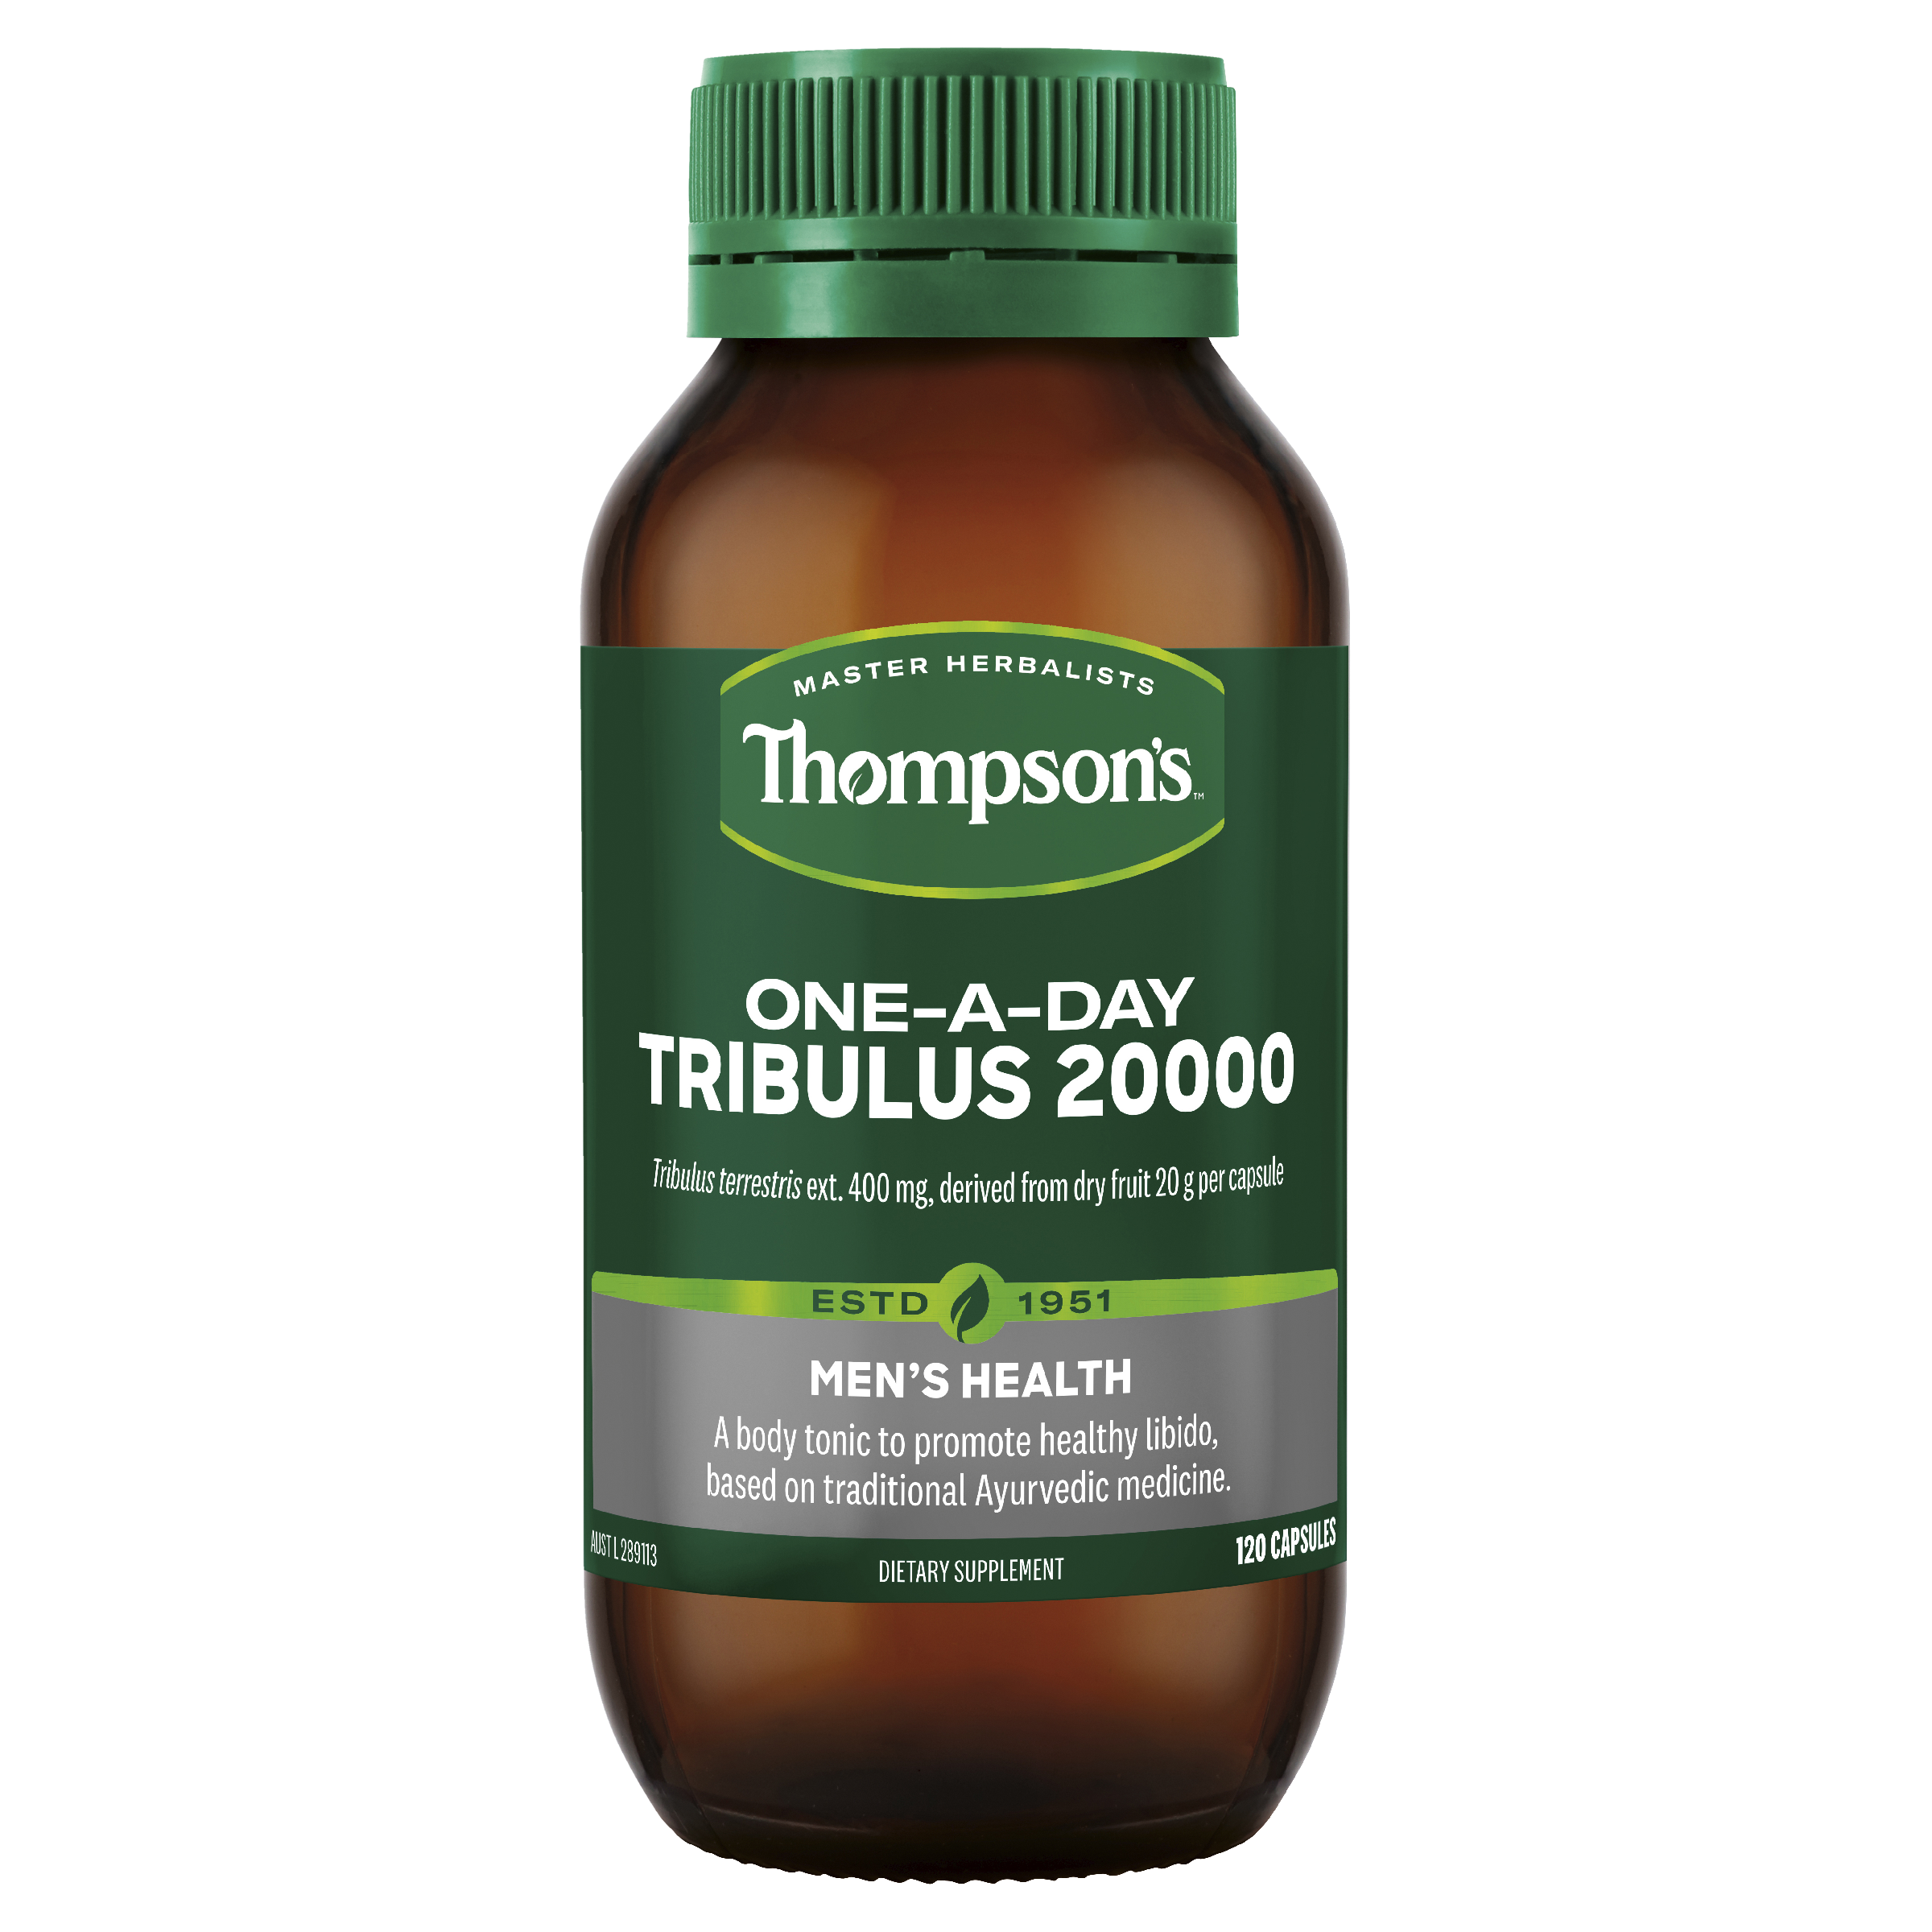 Thompsons One-A-Day Tribulus 20,000 120 Capsules